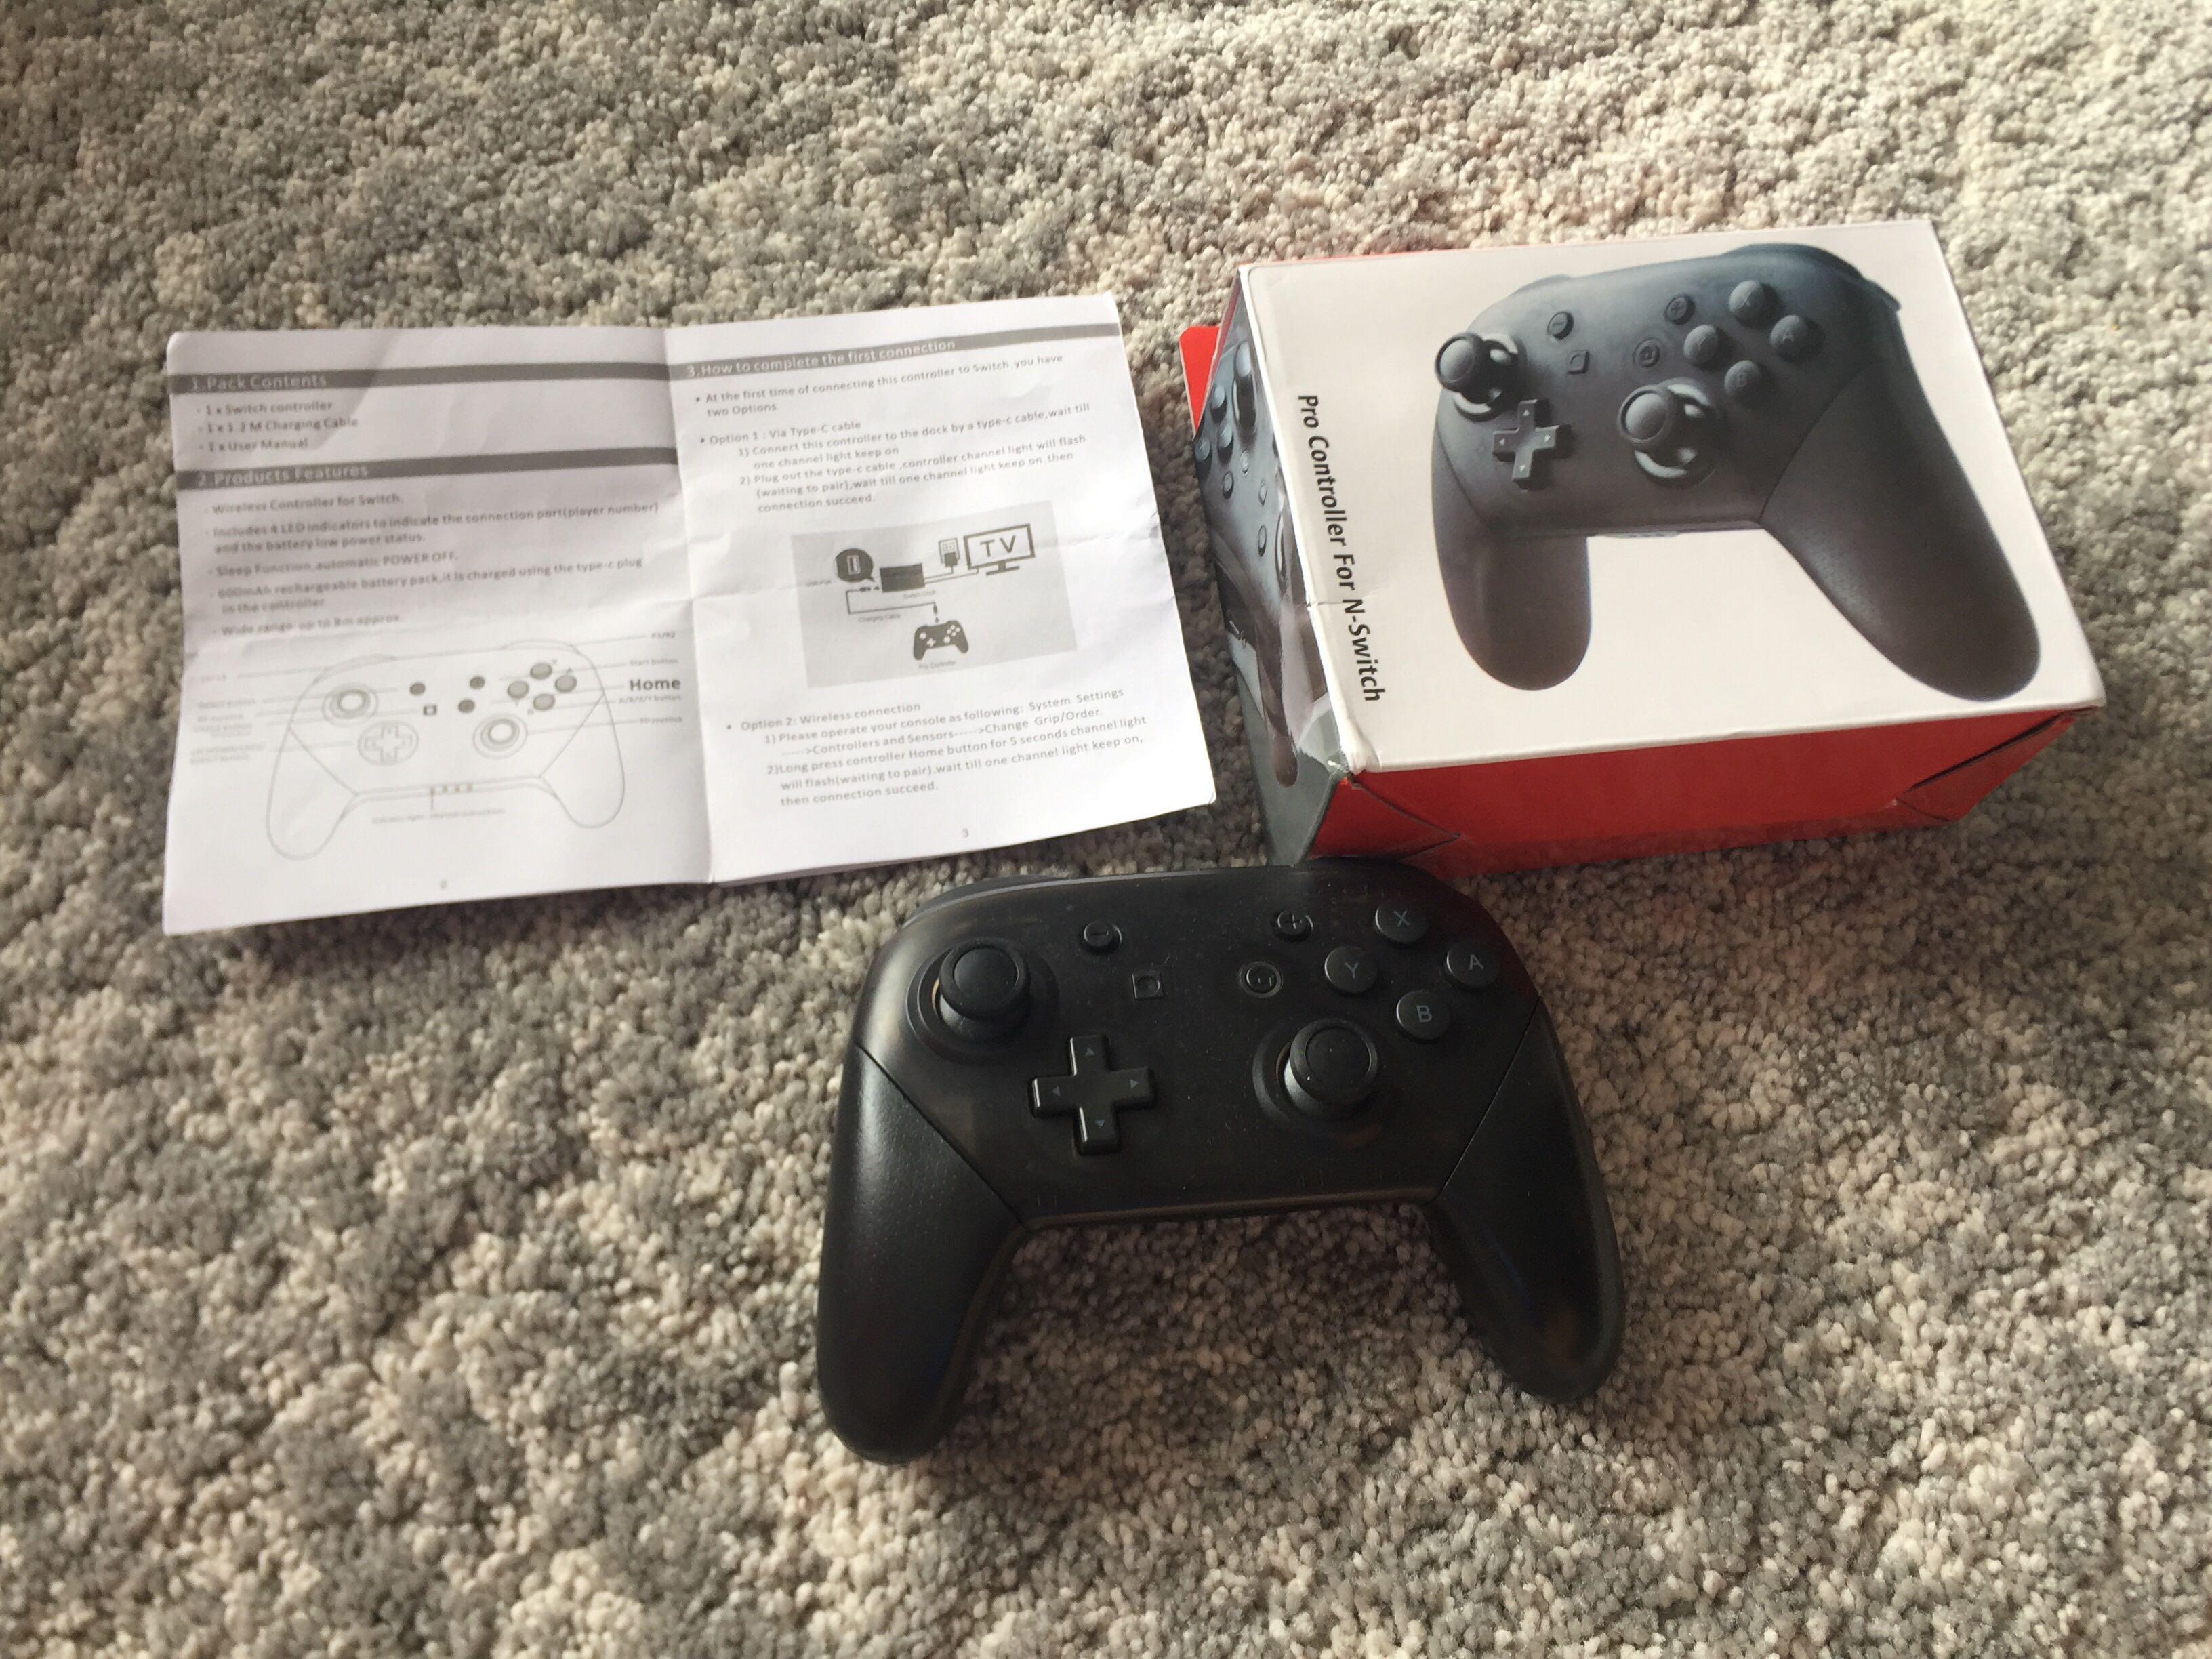 third party pro controller switch